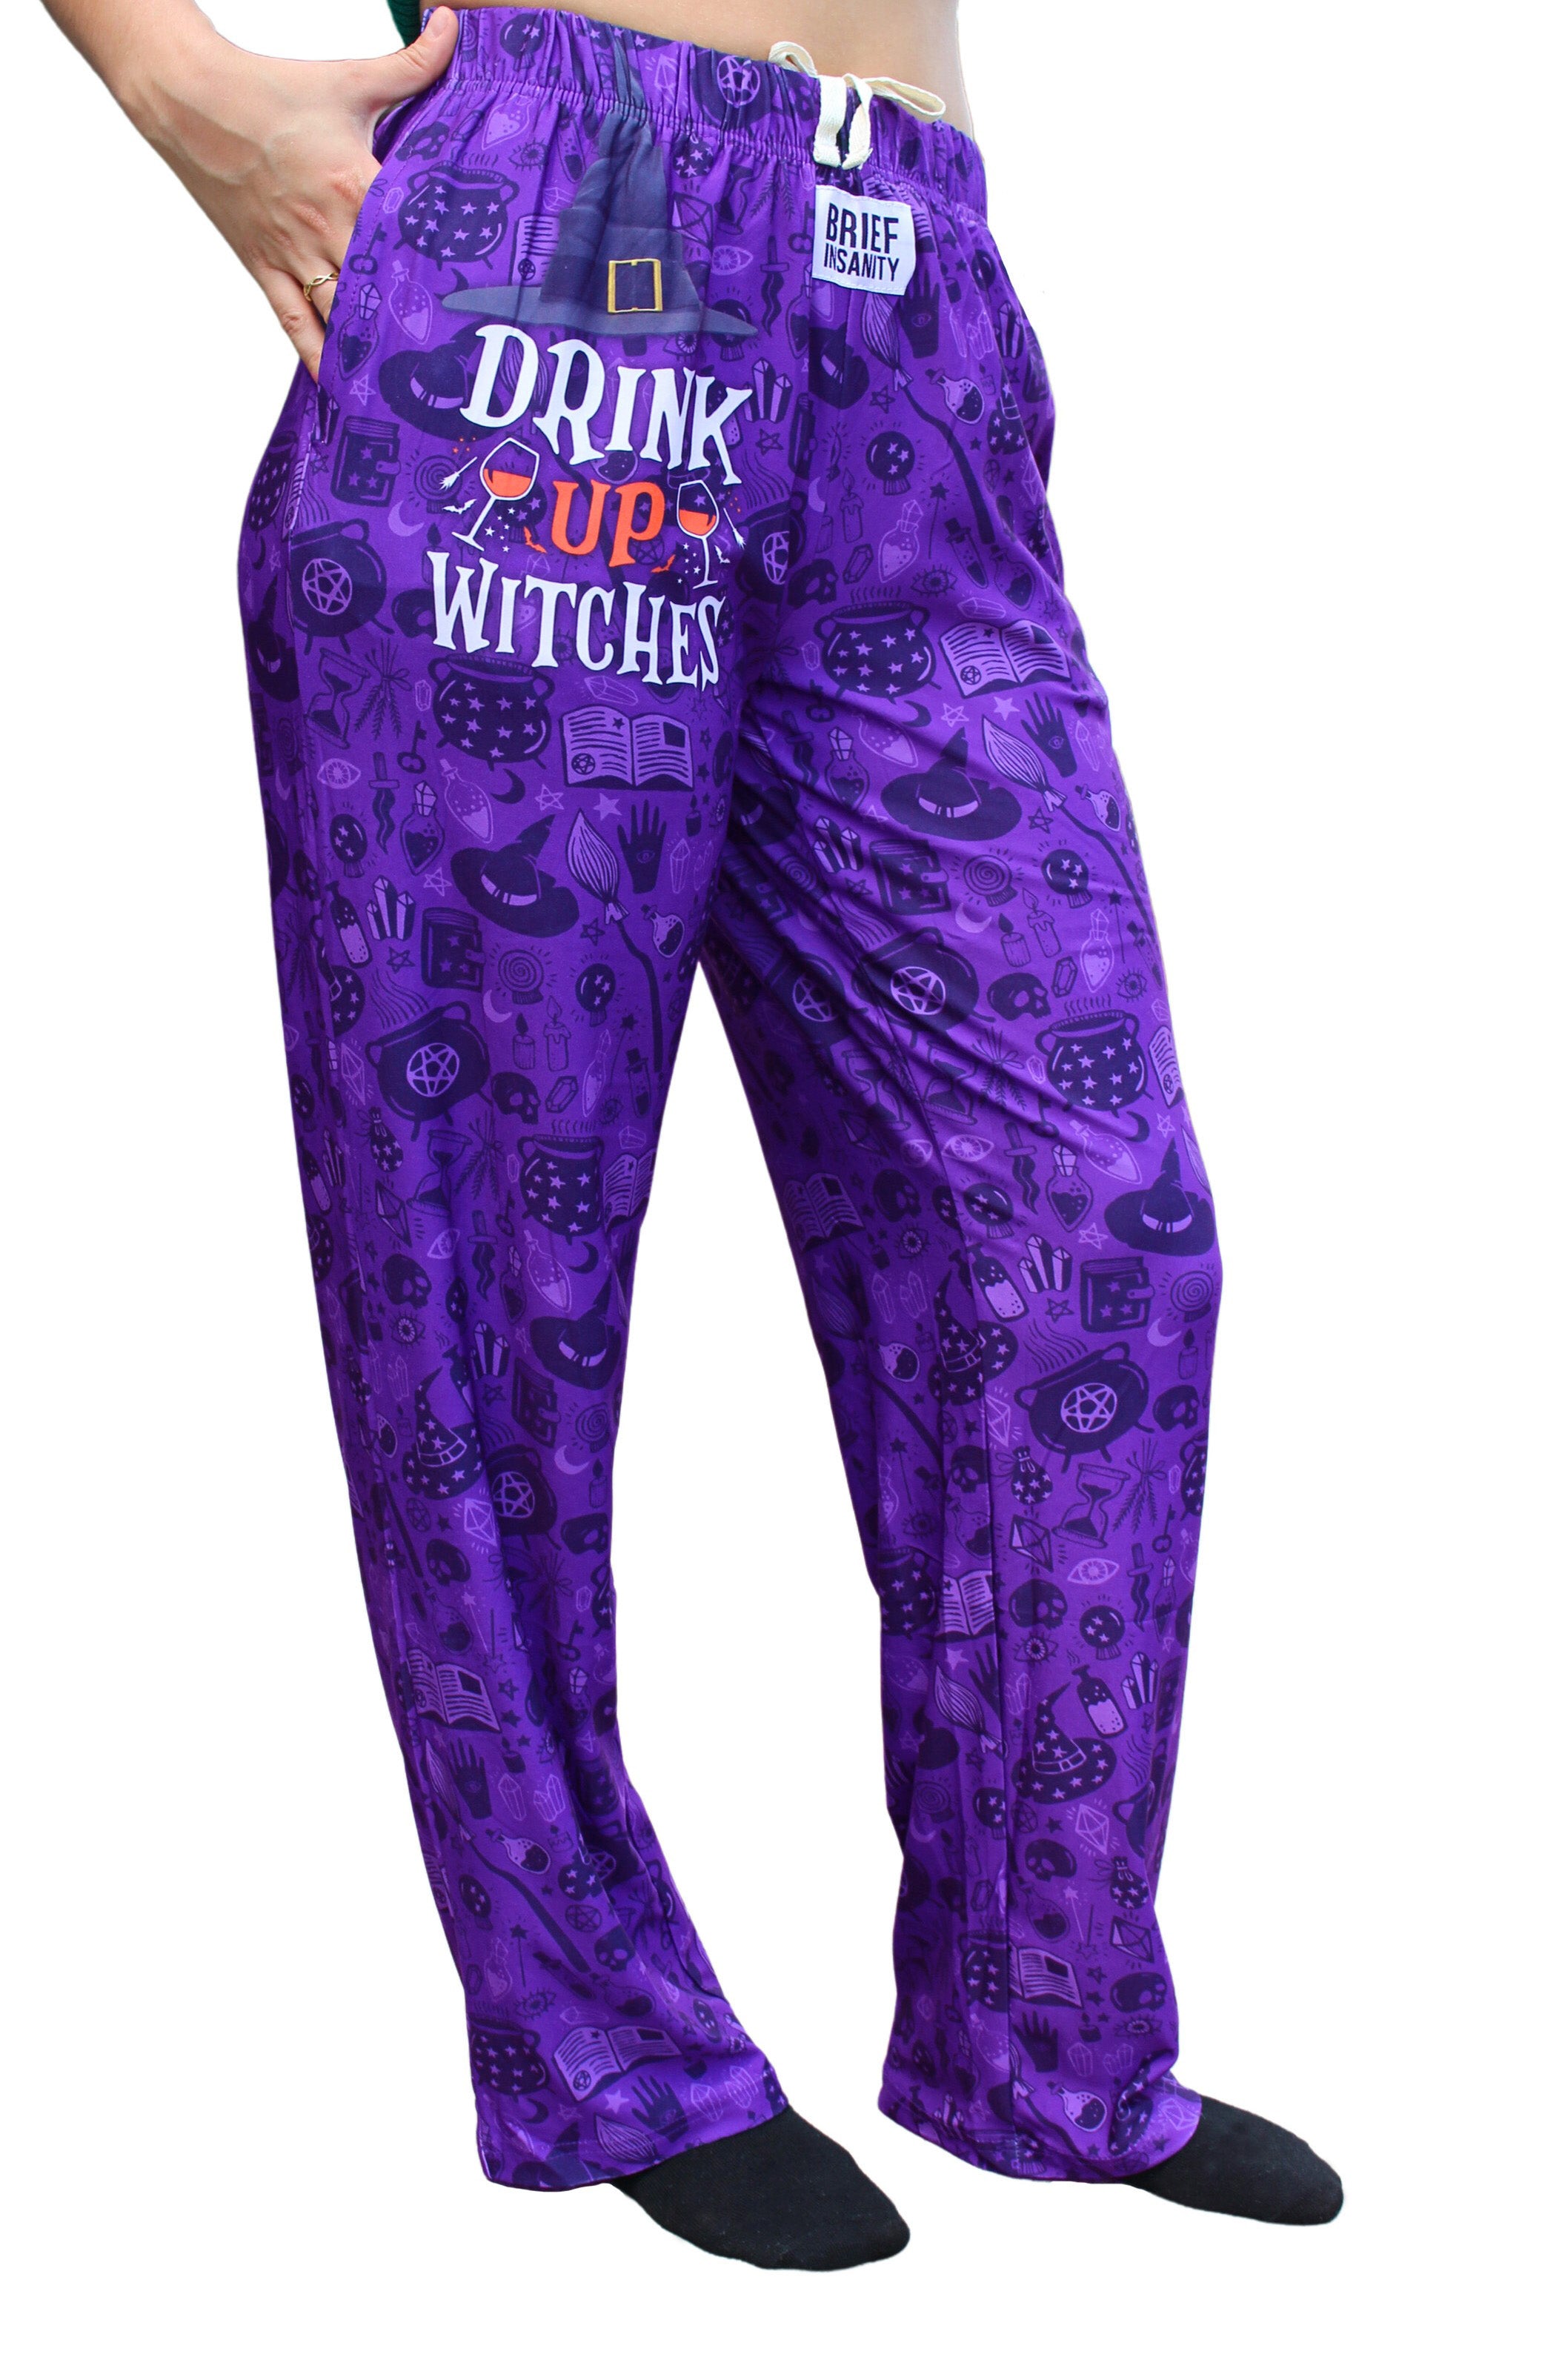 Drink Up Witches Pajama Lounge Pants right side view on model (waist down)